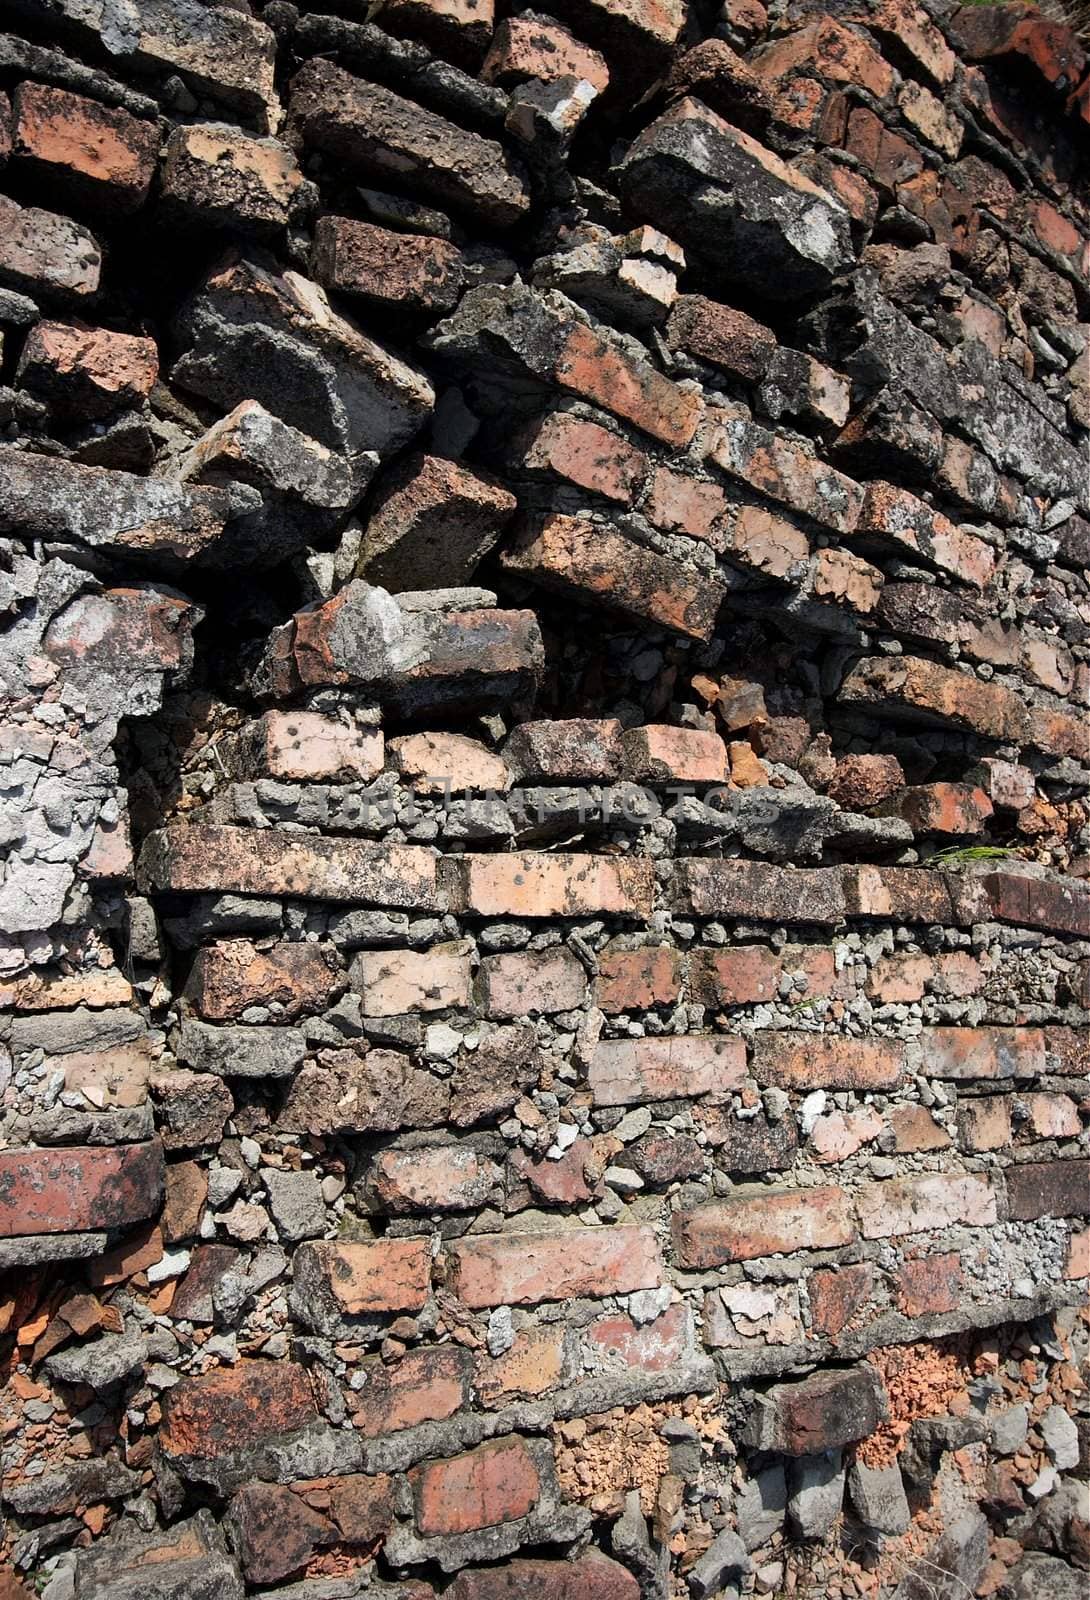 Ruined, old brick wall background